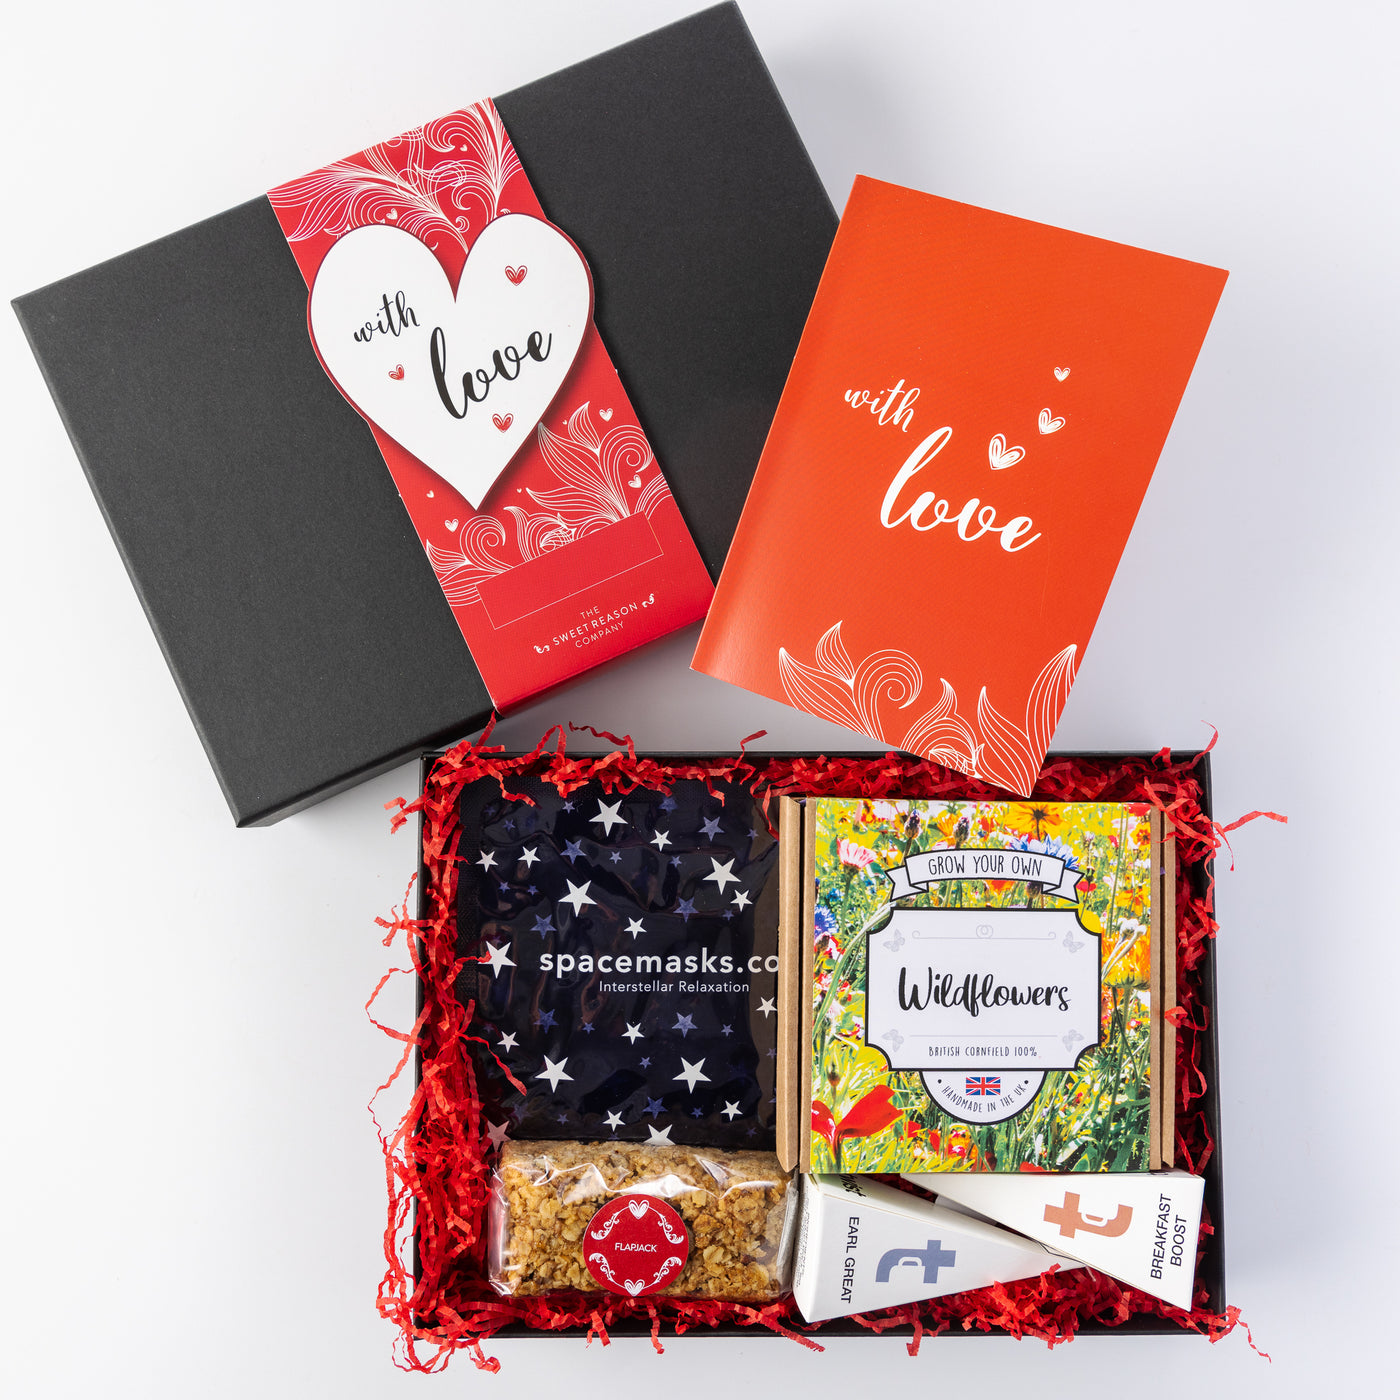 'With Love' Wellbeing Treats